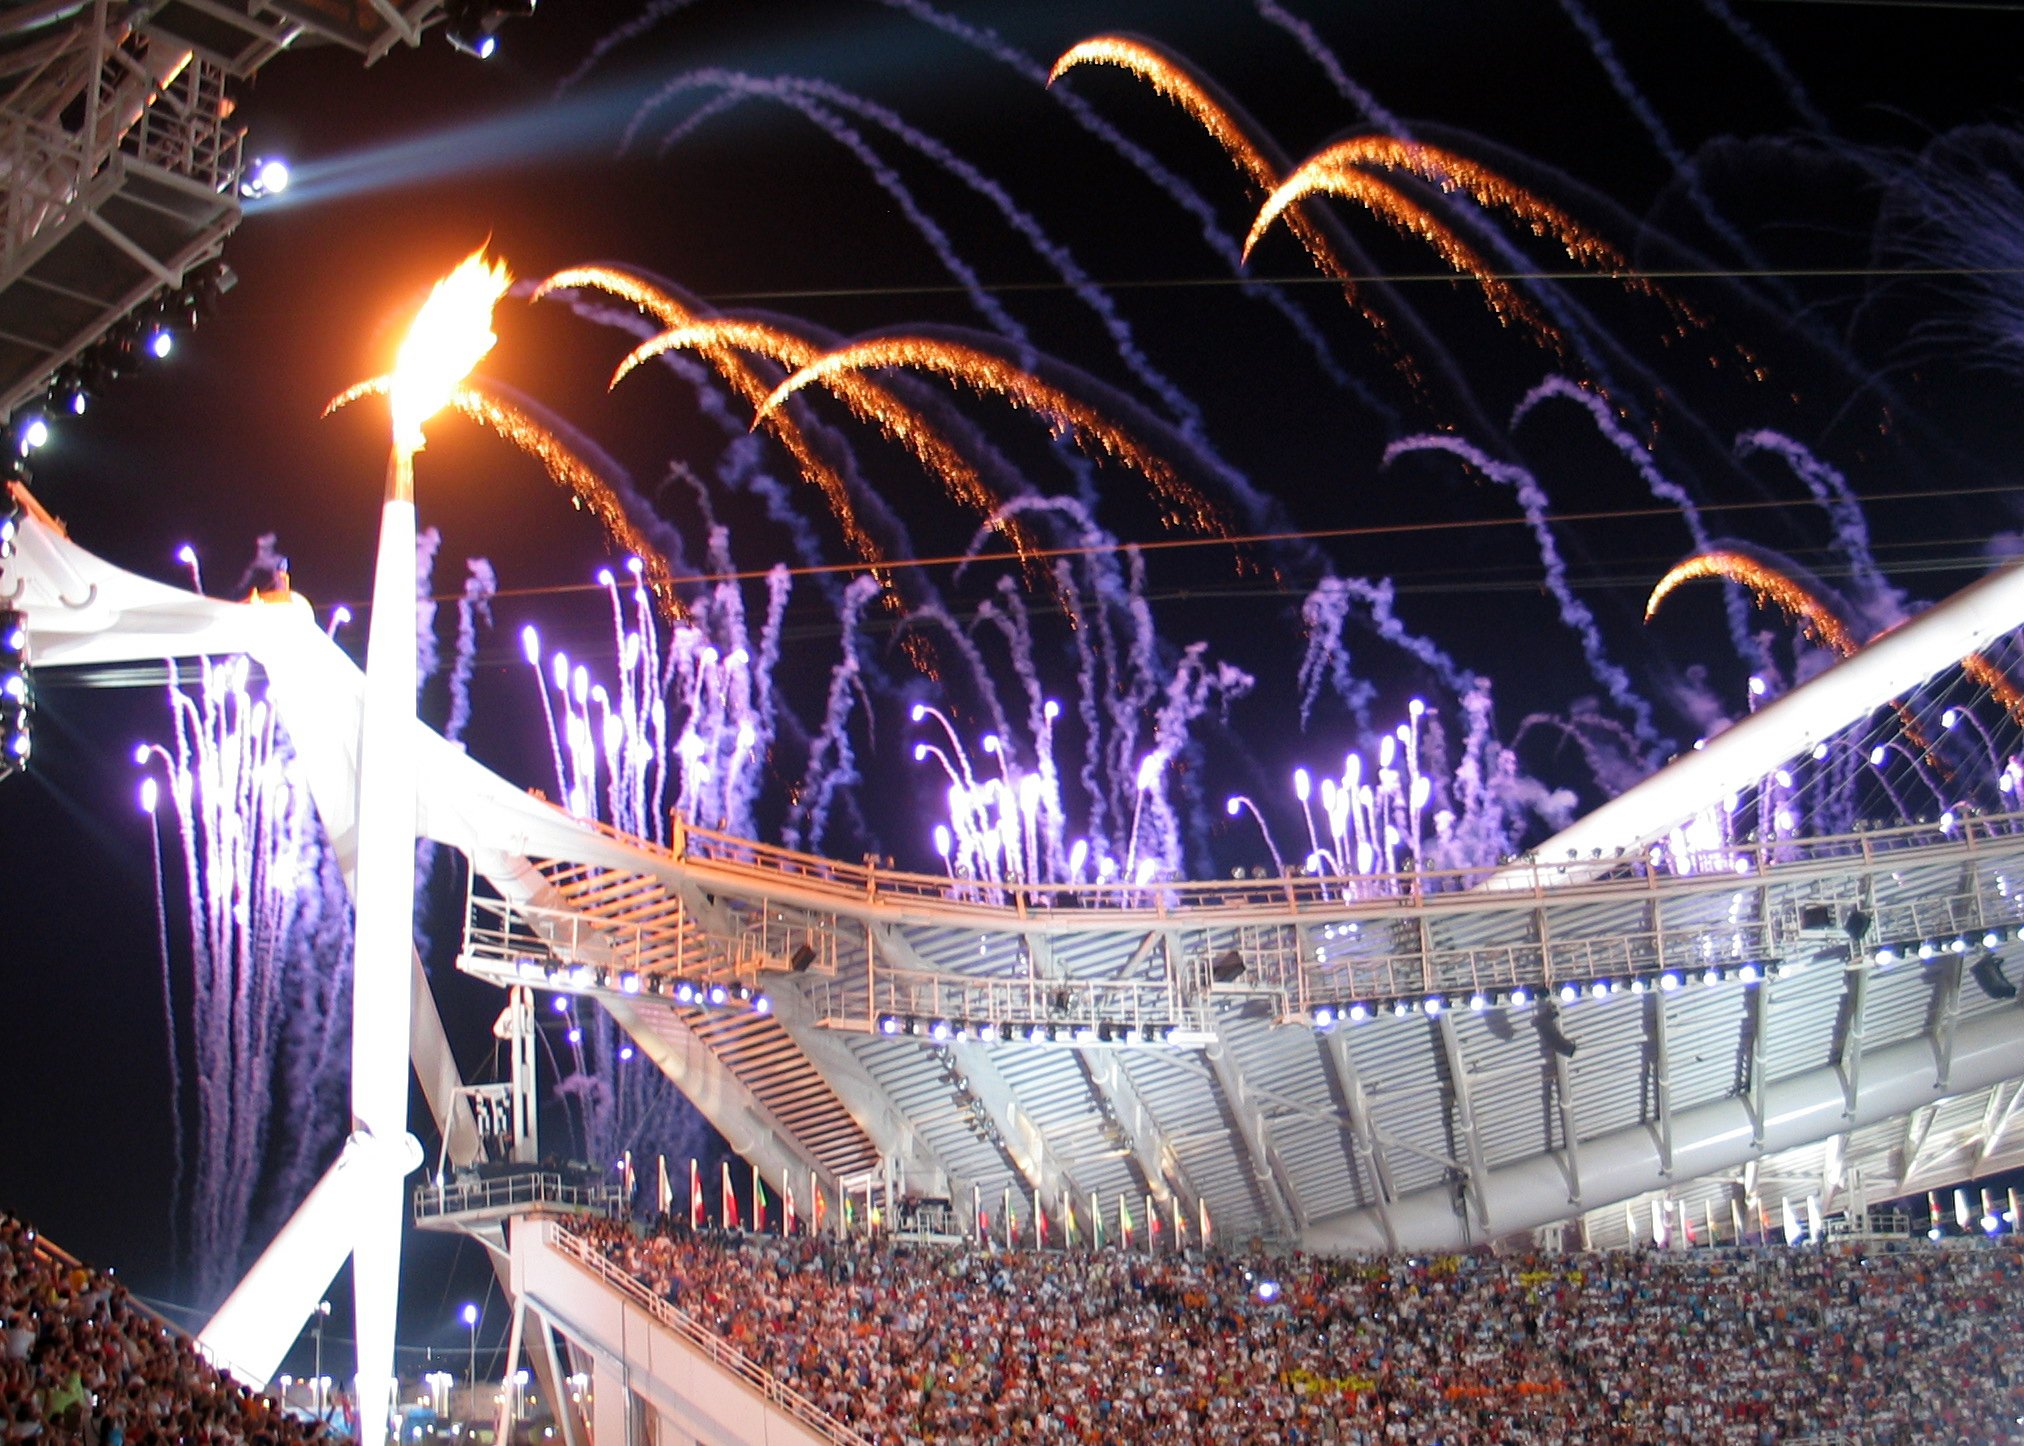 Olympic flame at 2004 opening ceremony in Athens. Greece | Source: Wikimedia Commons